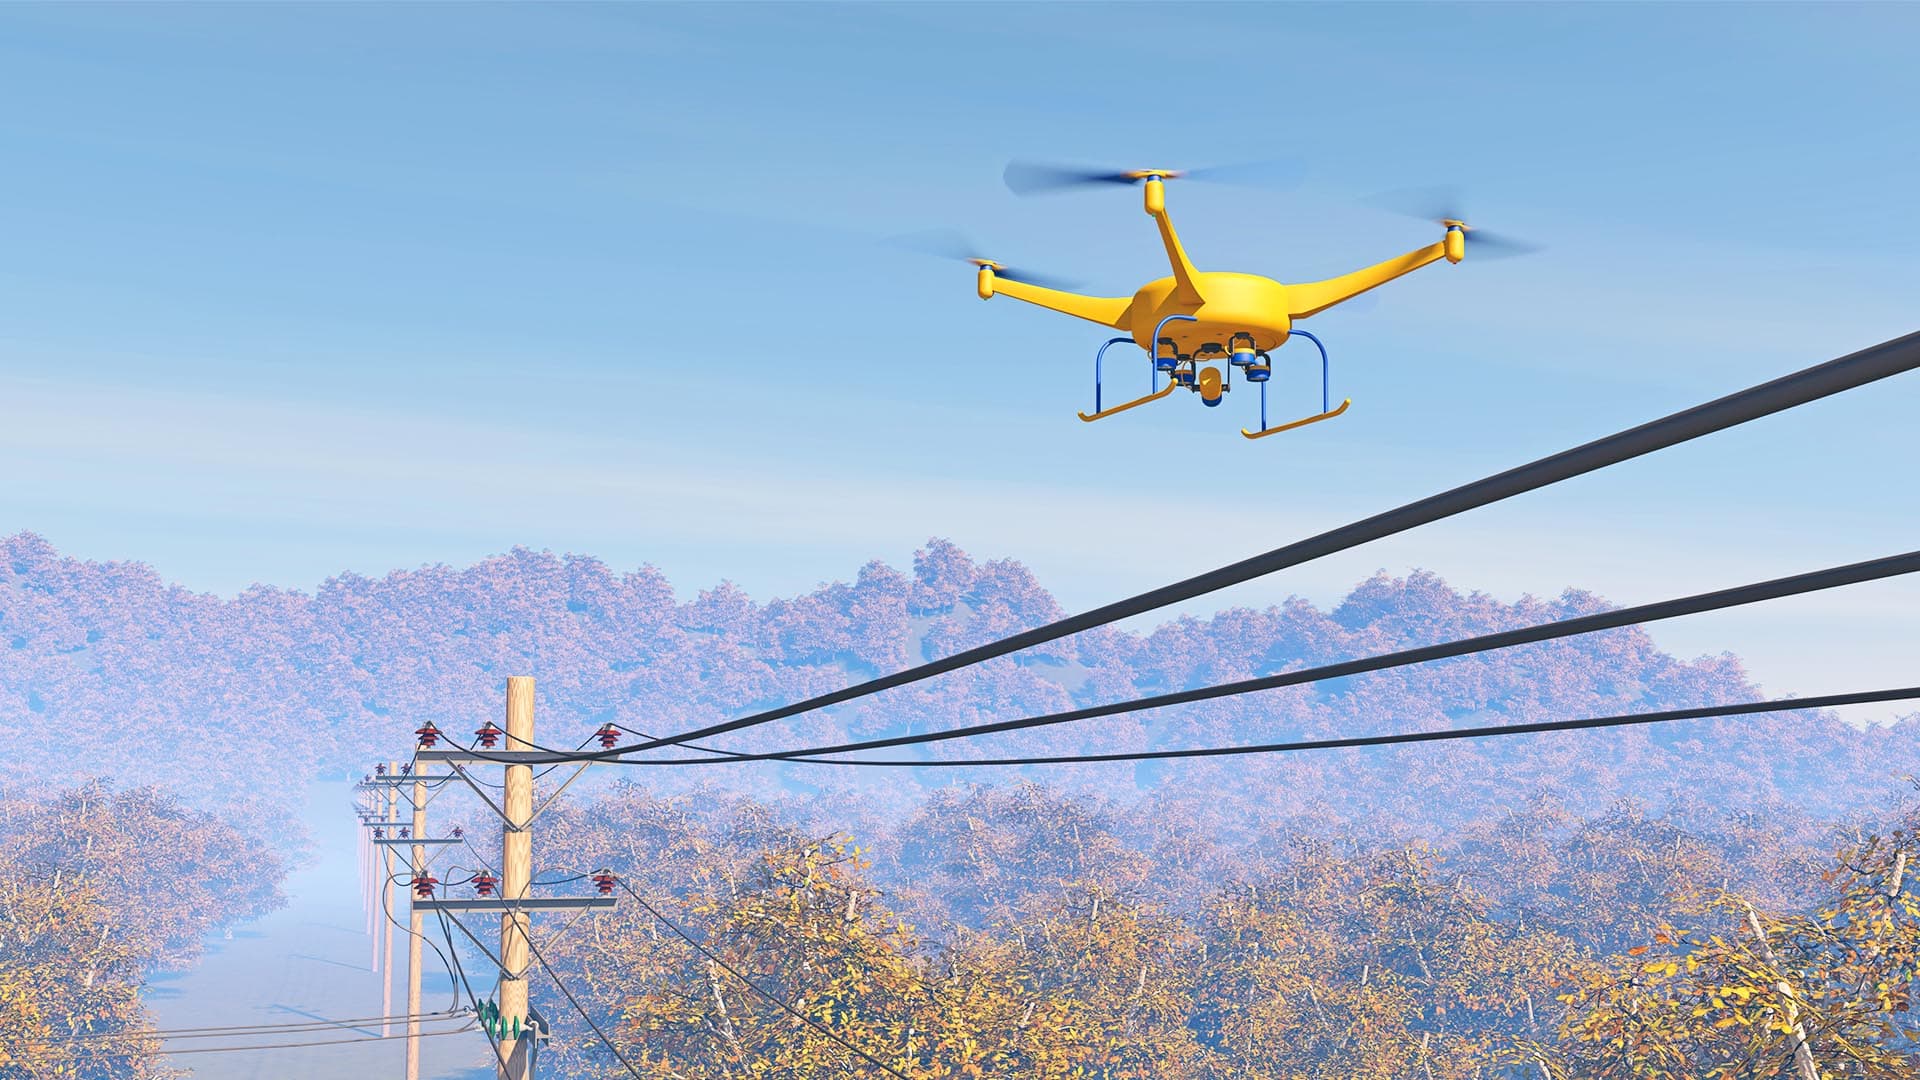 The business case for drones